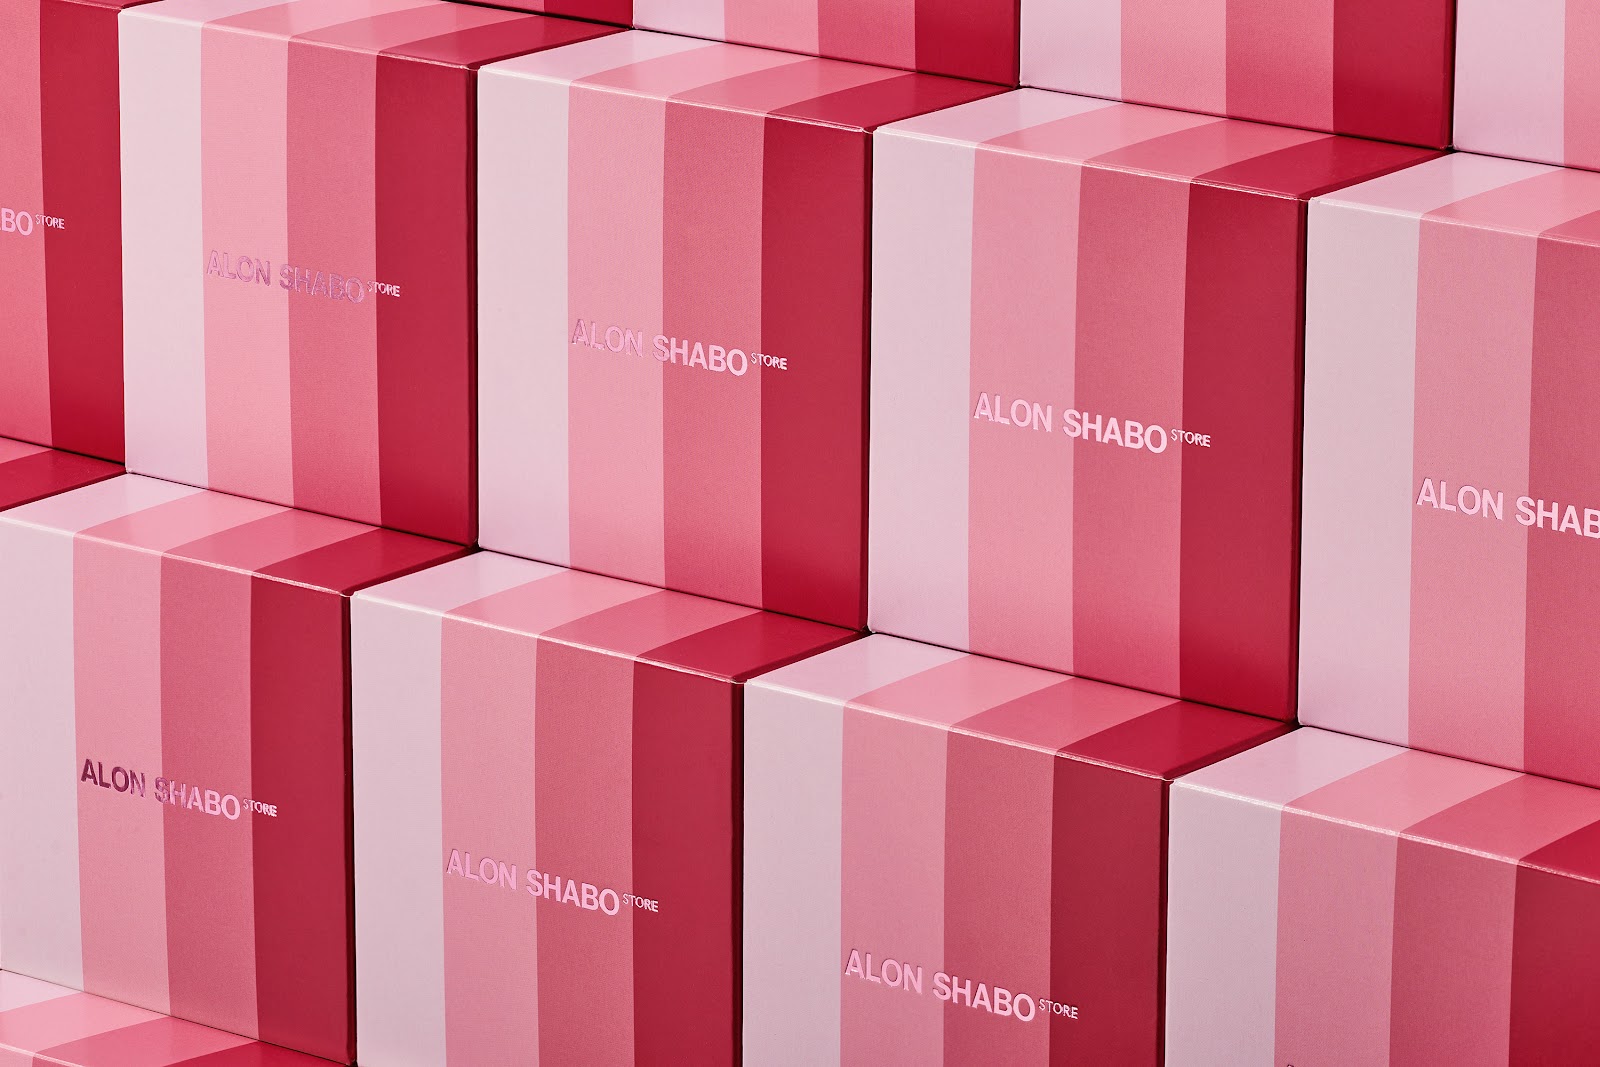 Artifacts for Logo design, packaging design, and visual identity for Alon Shabo Store